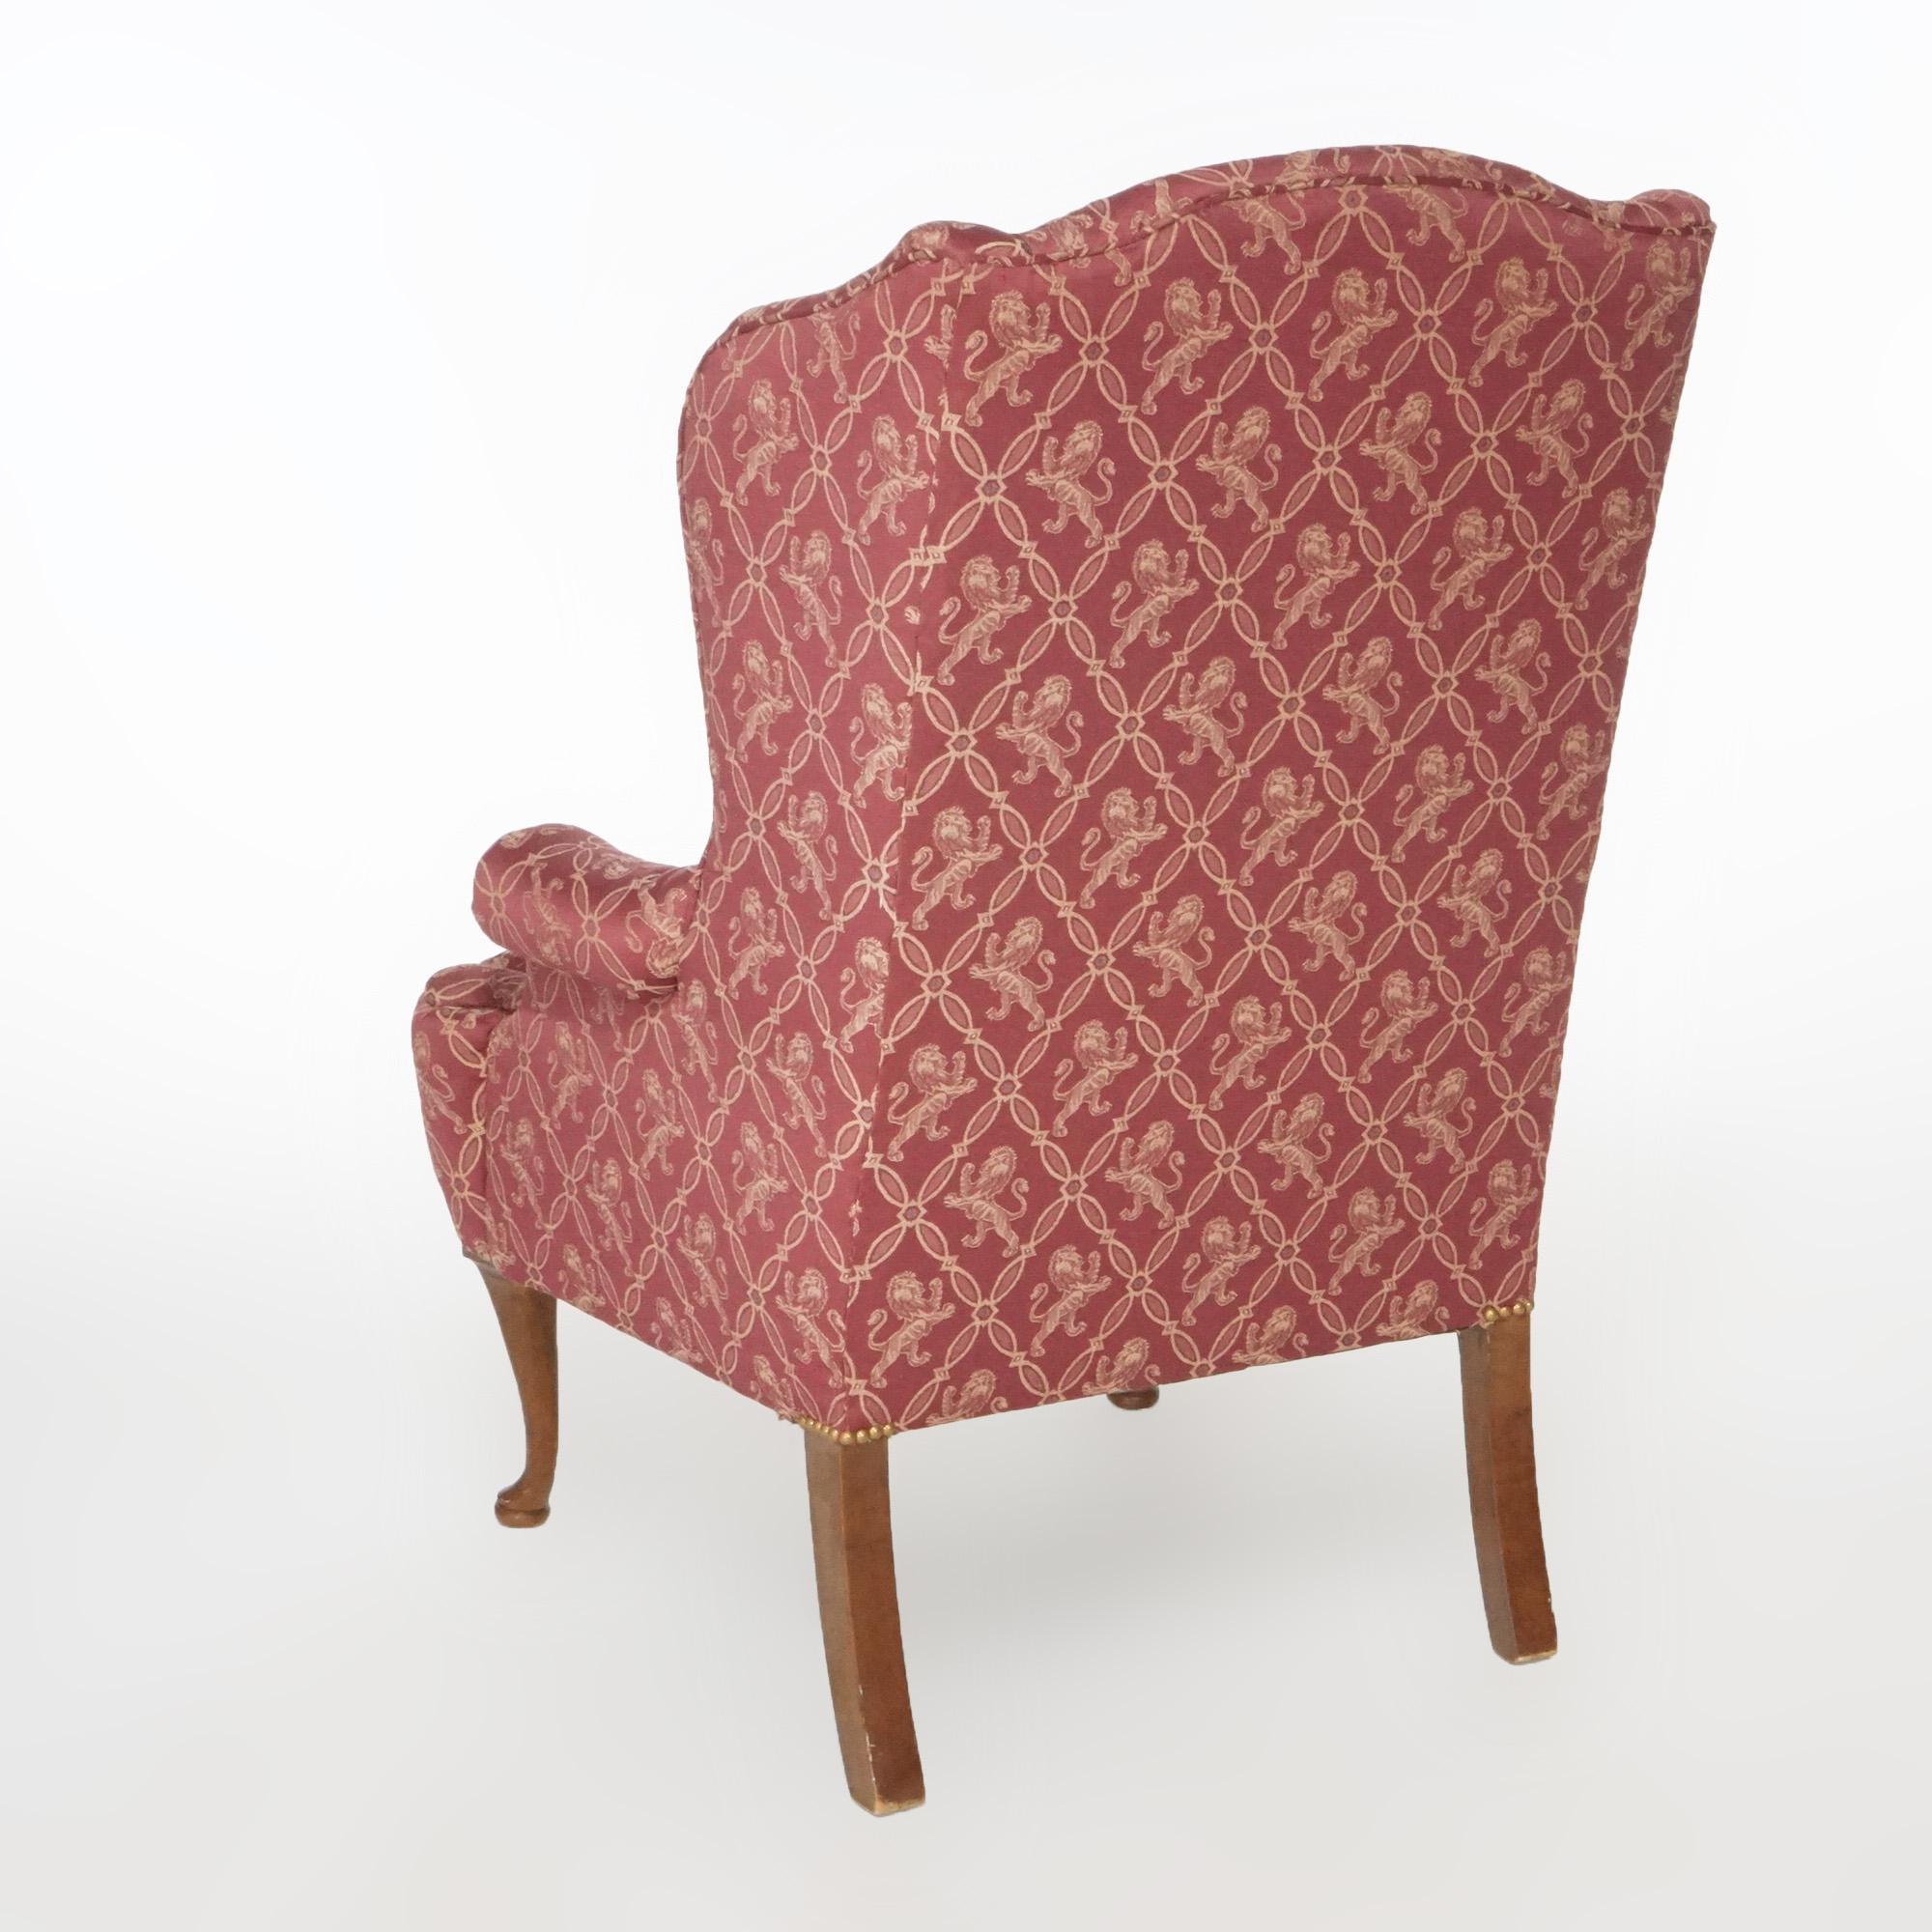 Queen Anne Mahogany Fireside Upholstered Wingback Chair, 20th Century For Sale 6